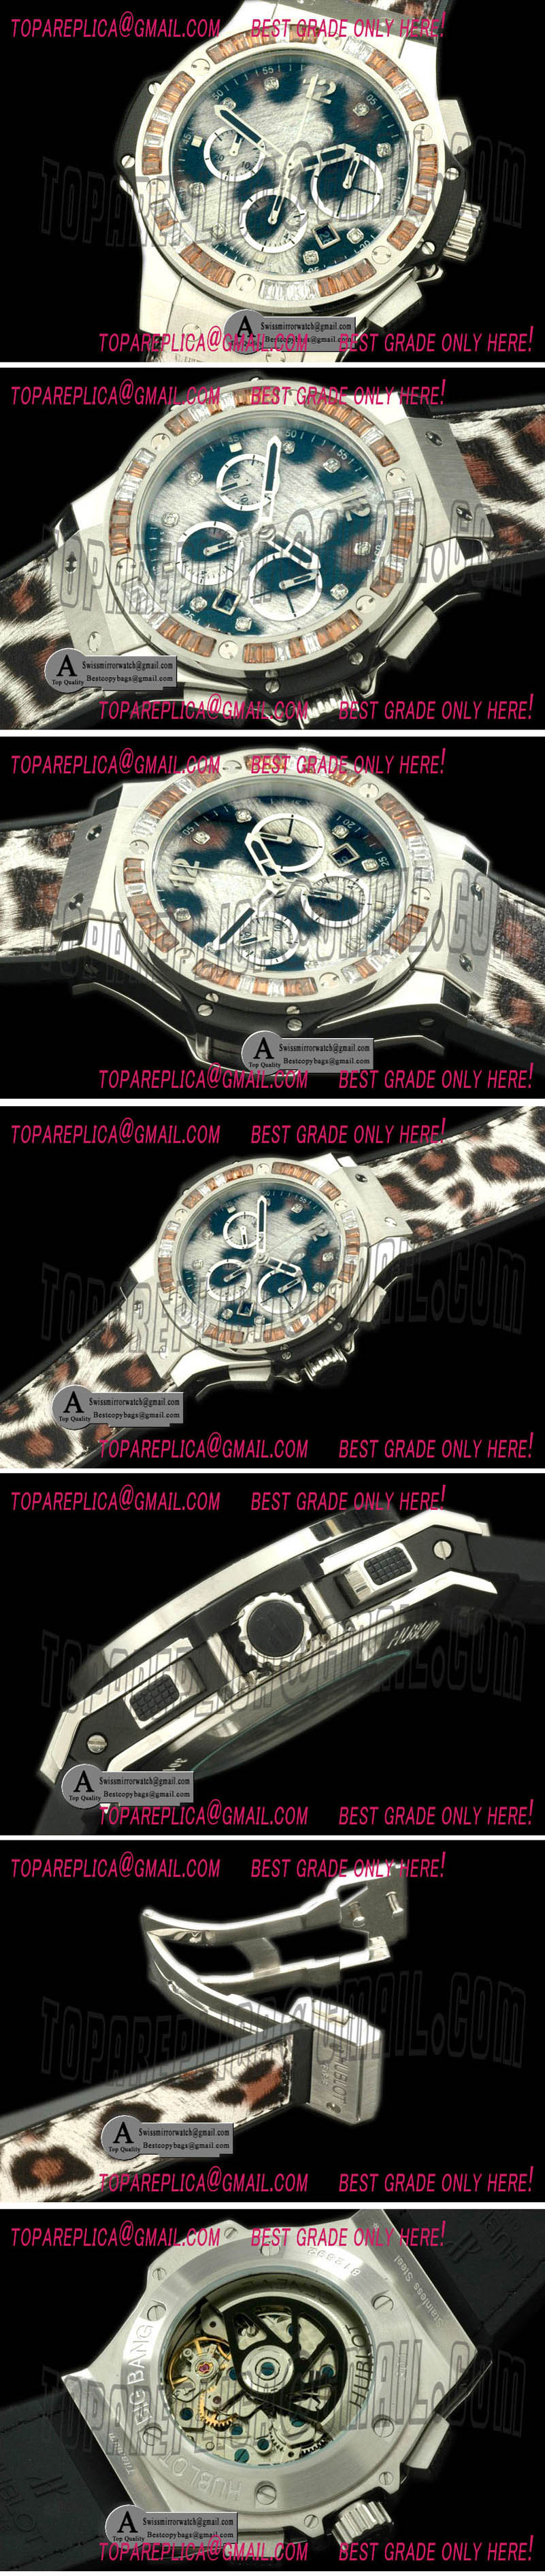 Hublot Leopard Bang SS Leather A-7750 Replica Watches